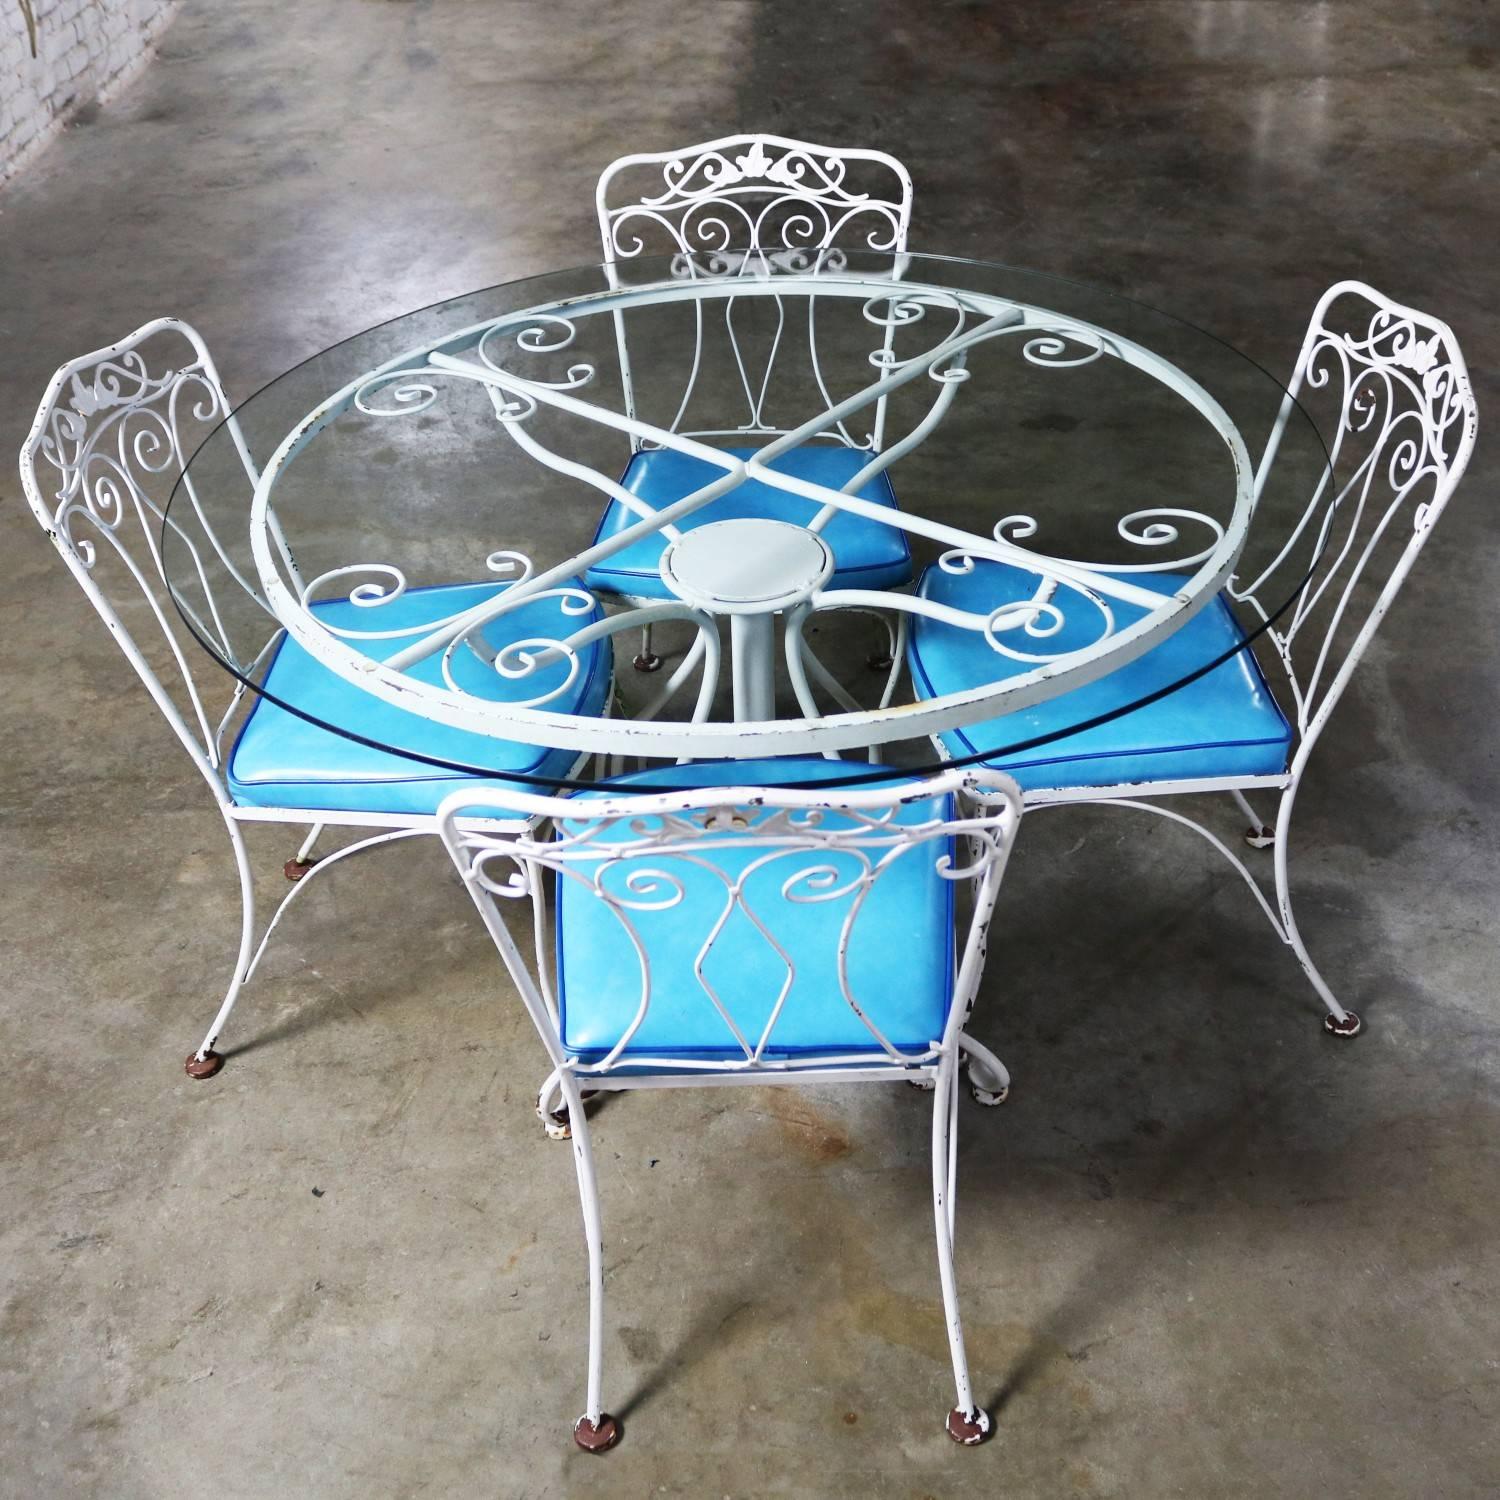 Lovely Salterini style wrought iron patio set consisting of a round dining table with pedestal base and glass top and four chairs with turquoise vinyl attached seats. This circa 1950s set is in wonderful vintage condition. The white paint on the